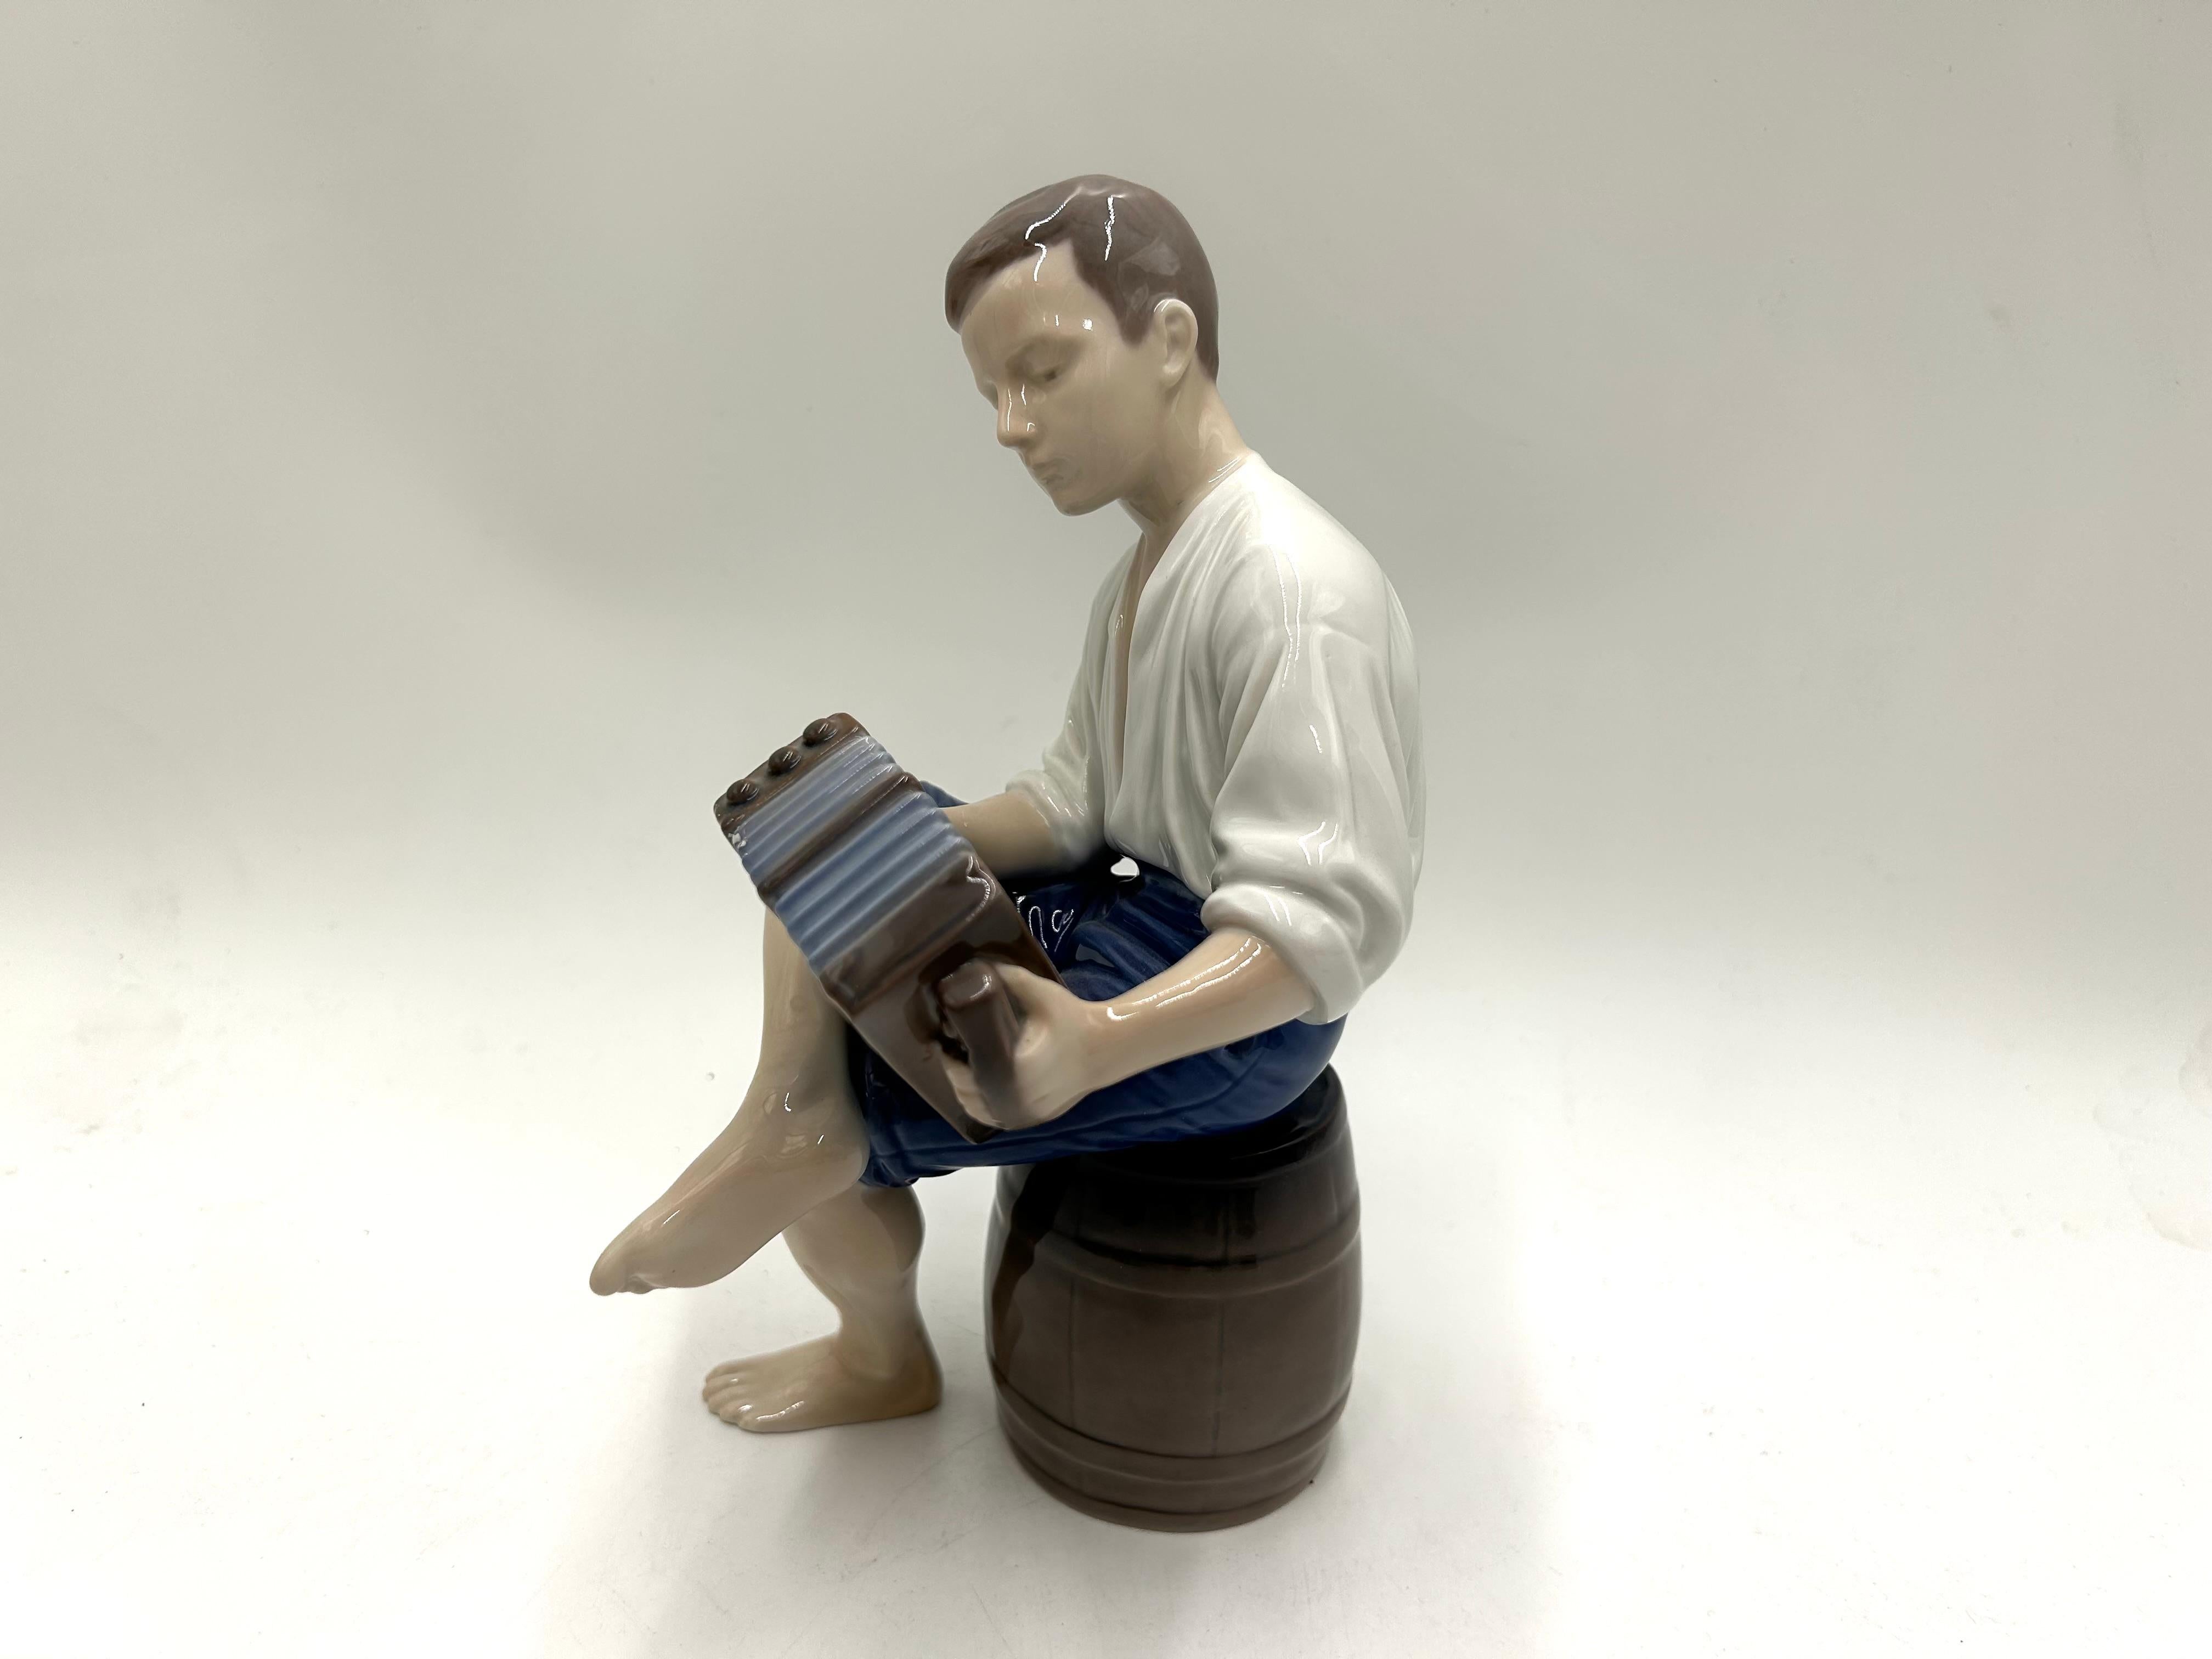 Porcelain figurine of a boy with an accordion.
Produced by the Danish Bing&Grondahl manufactory.
Mark used in 1948-1952.
Very good condition, no damage
Measures: Height: 22cm
Width: 12cm
Depth: 15cm